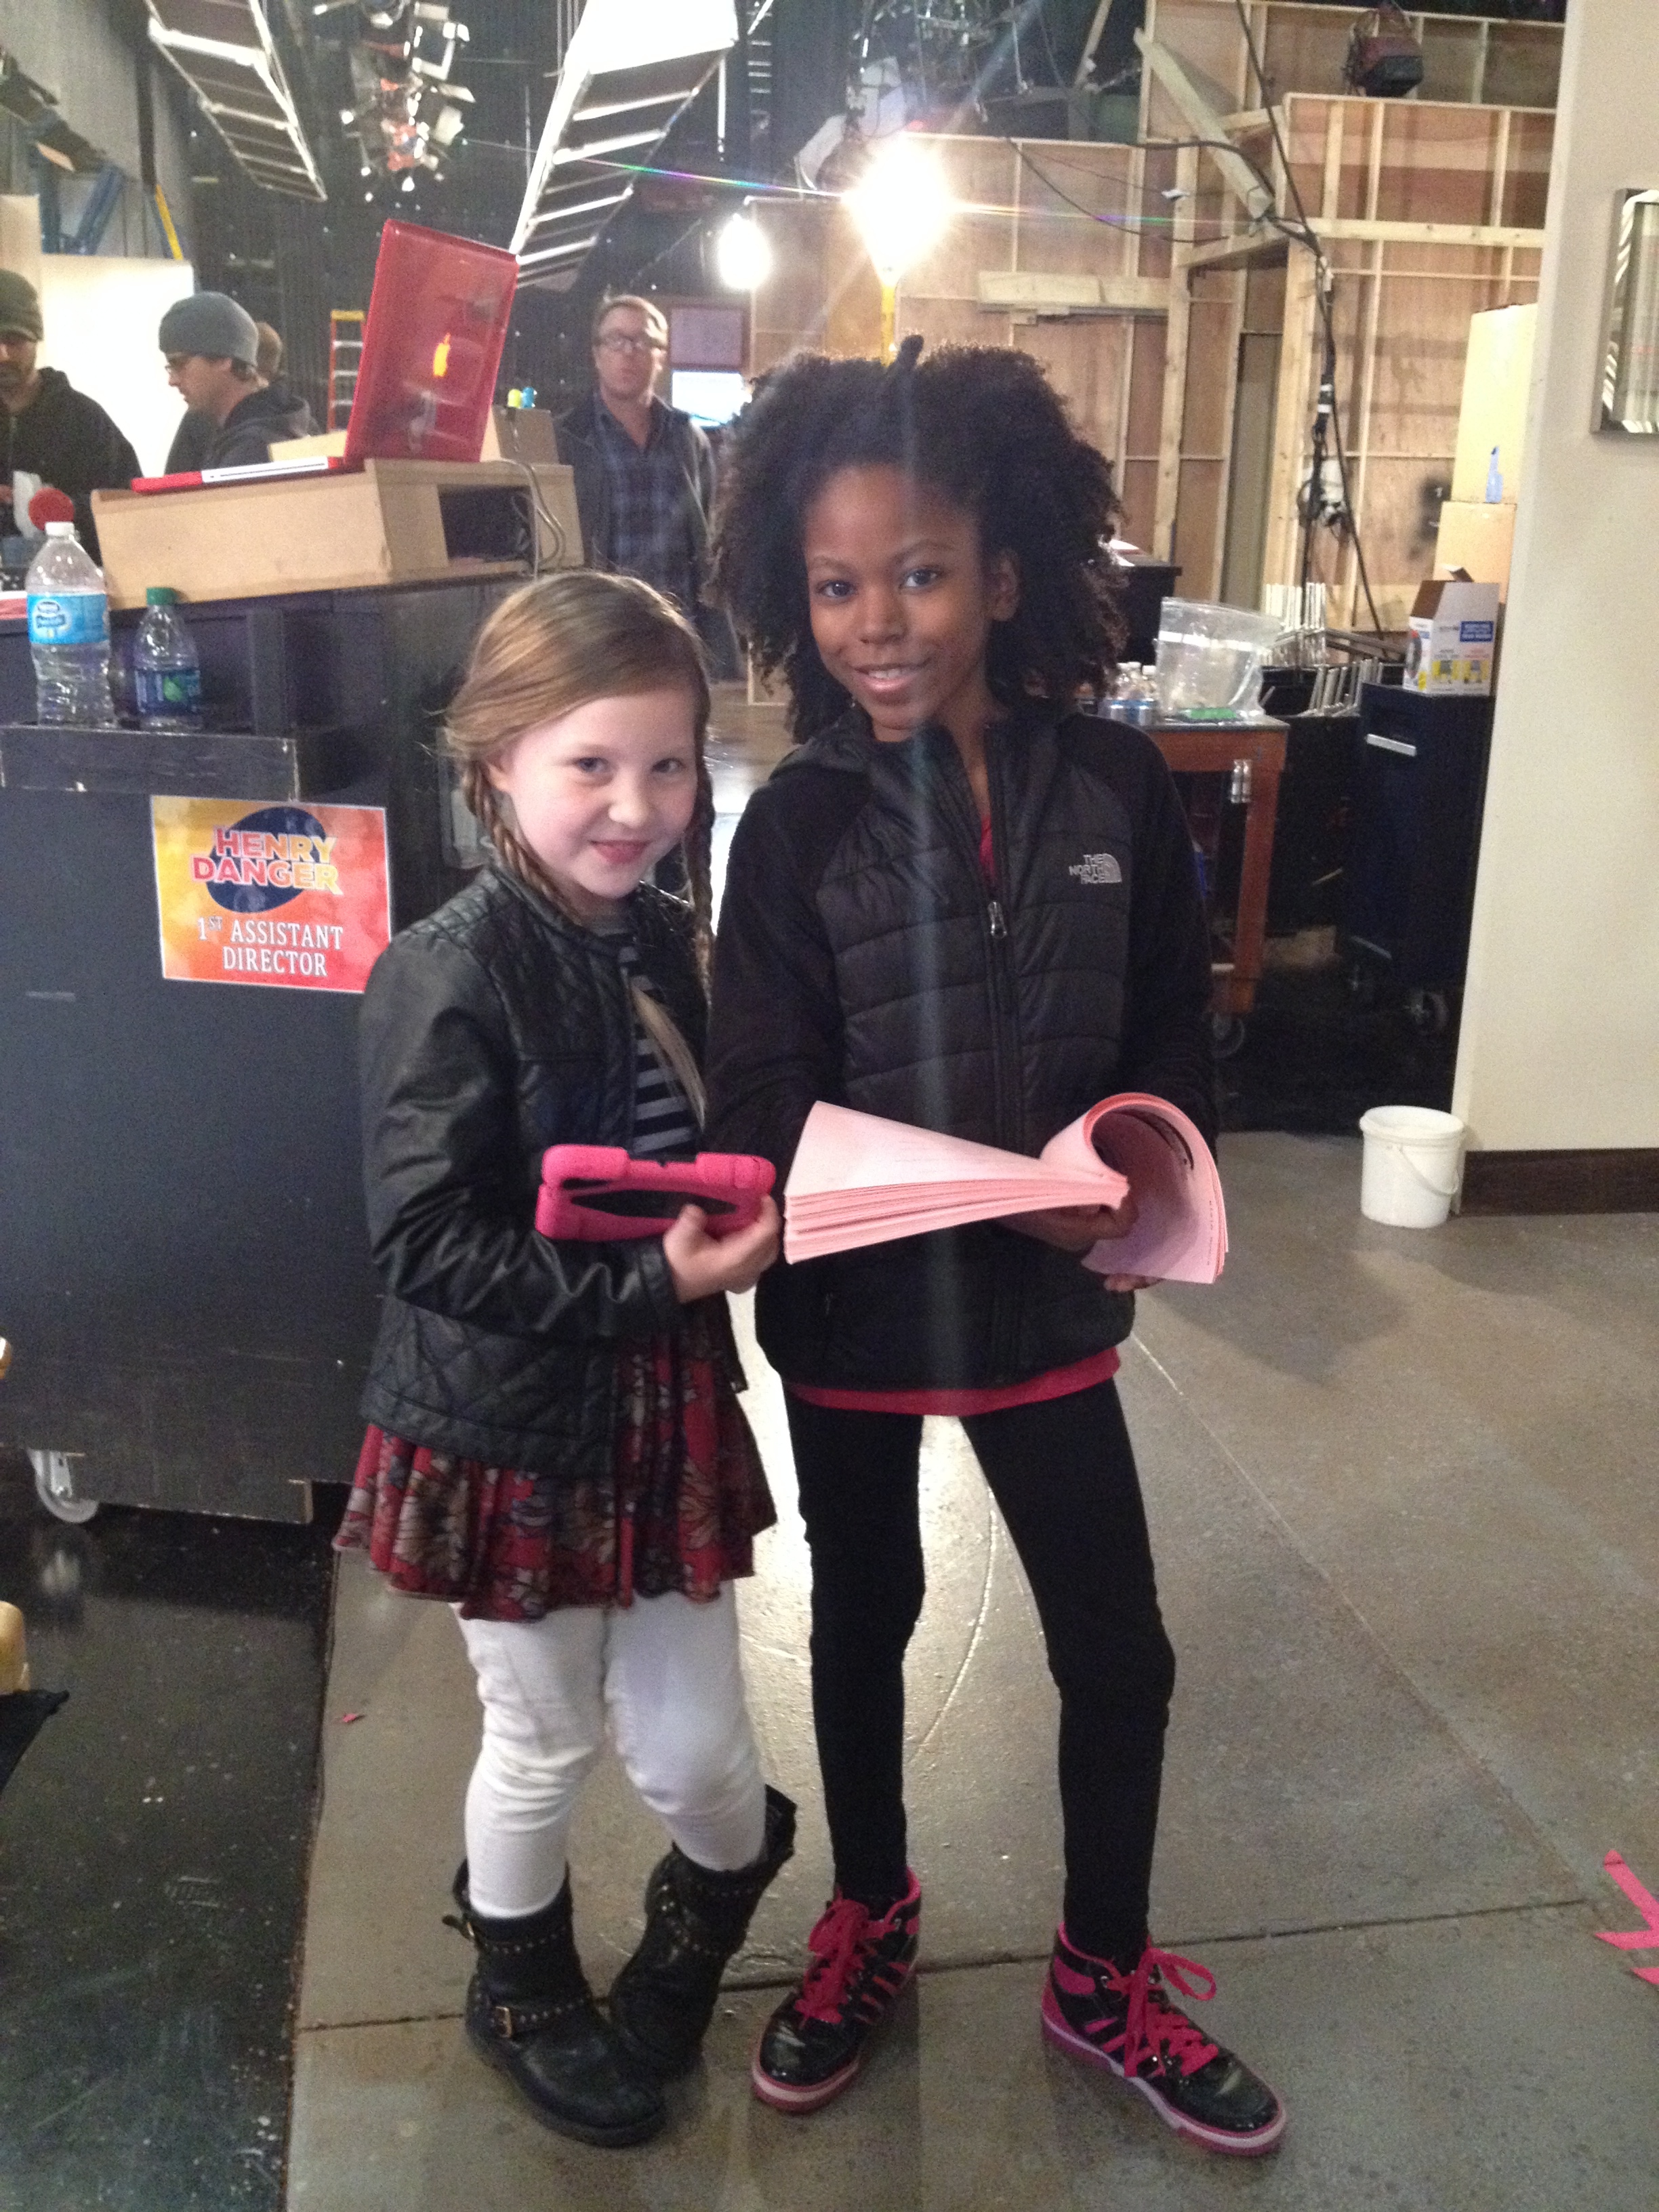 Ella Anderson and Riele Downs on set of Nickeloden show Henry Danger